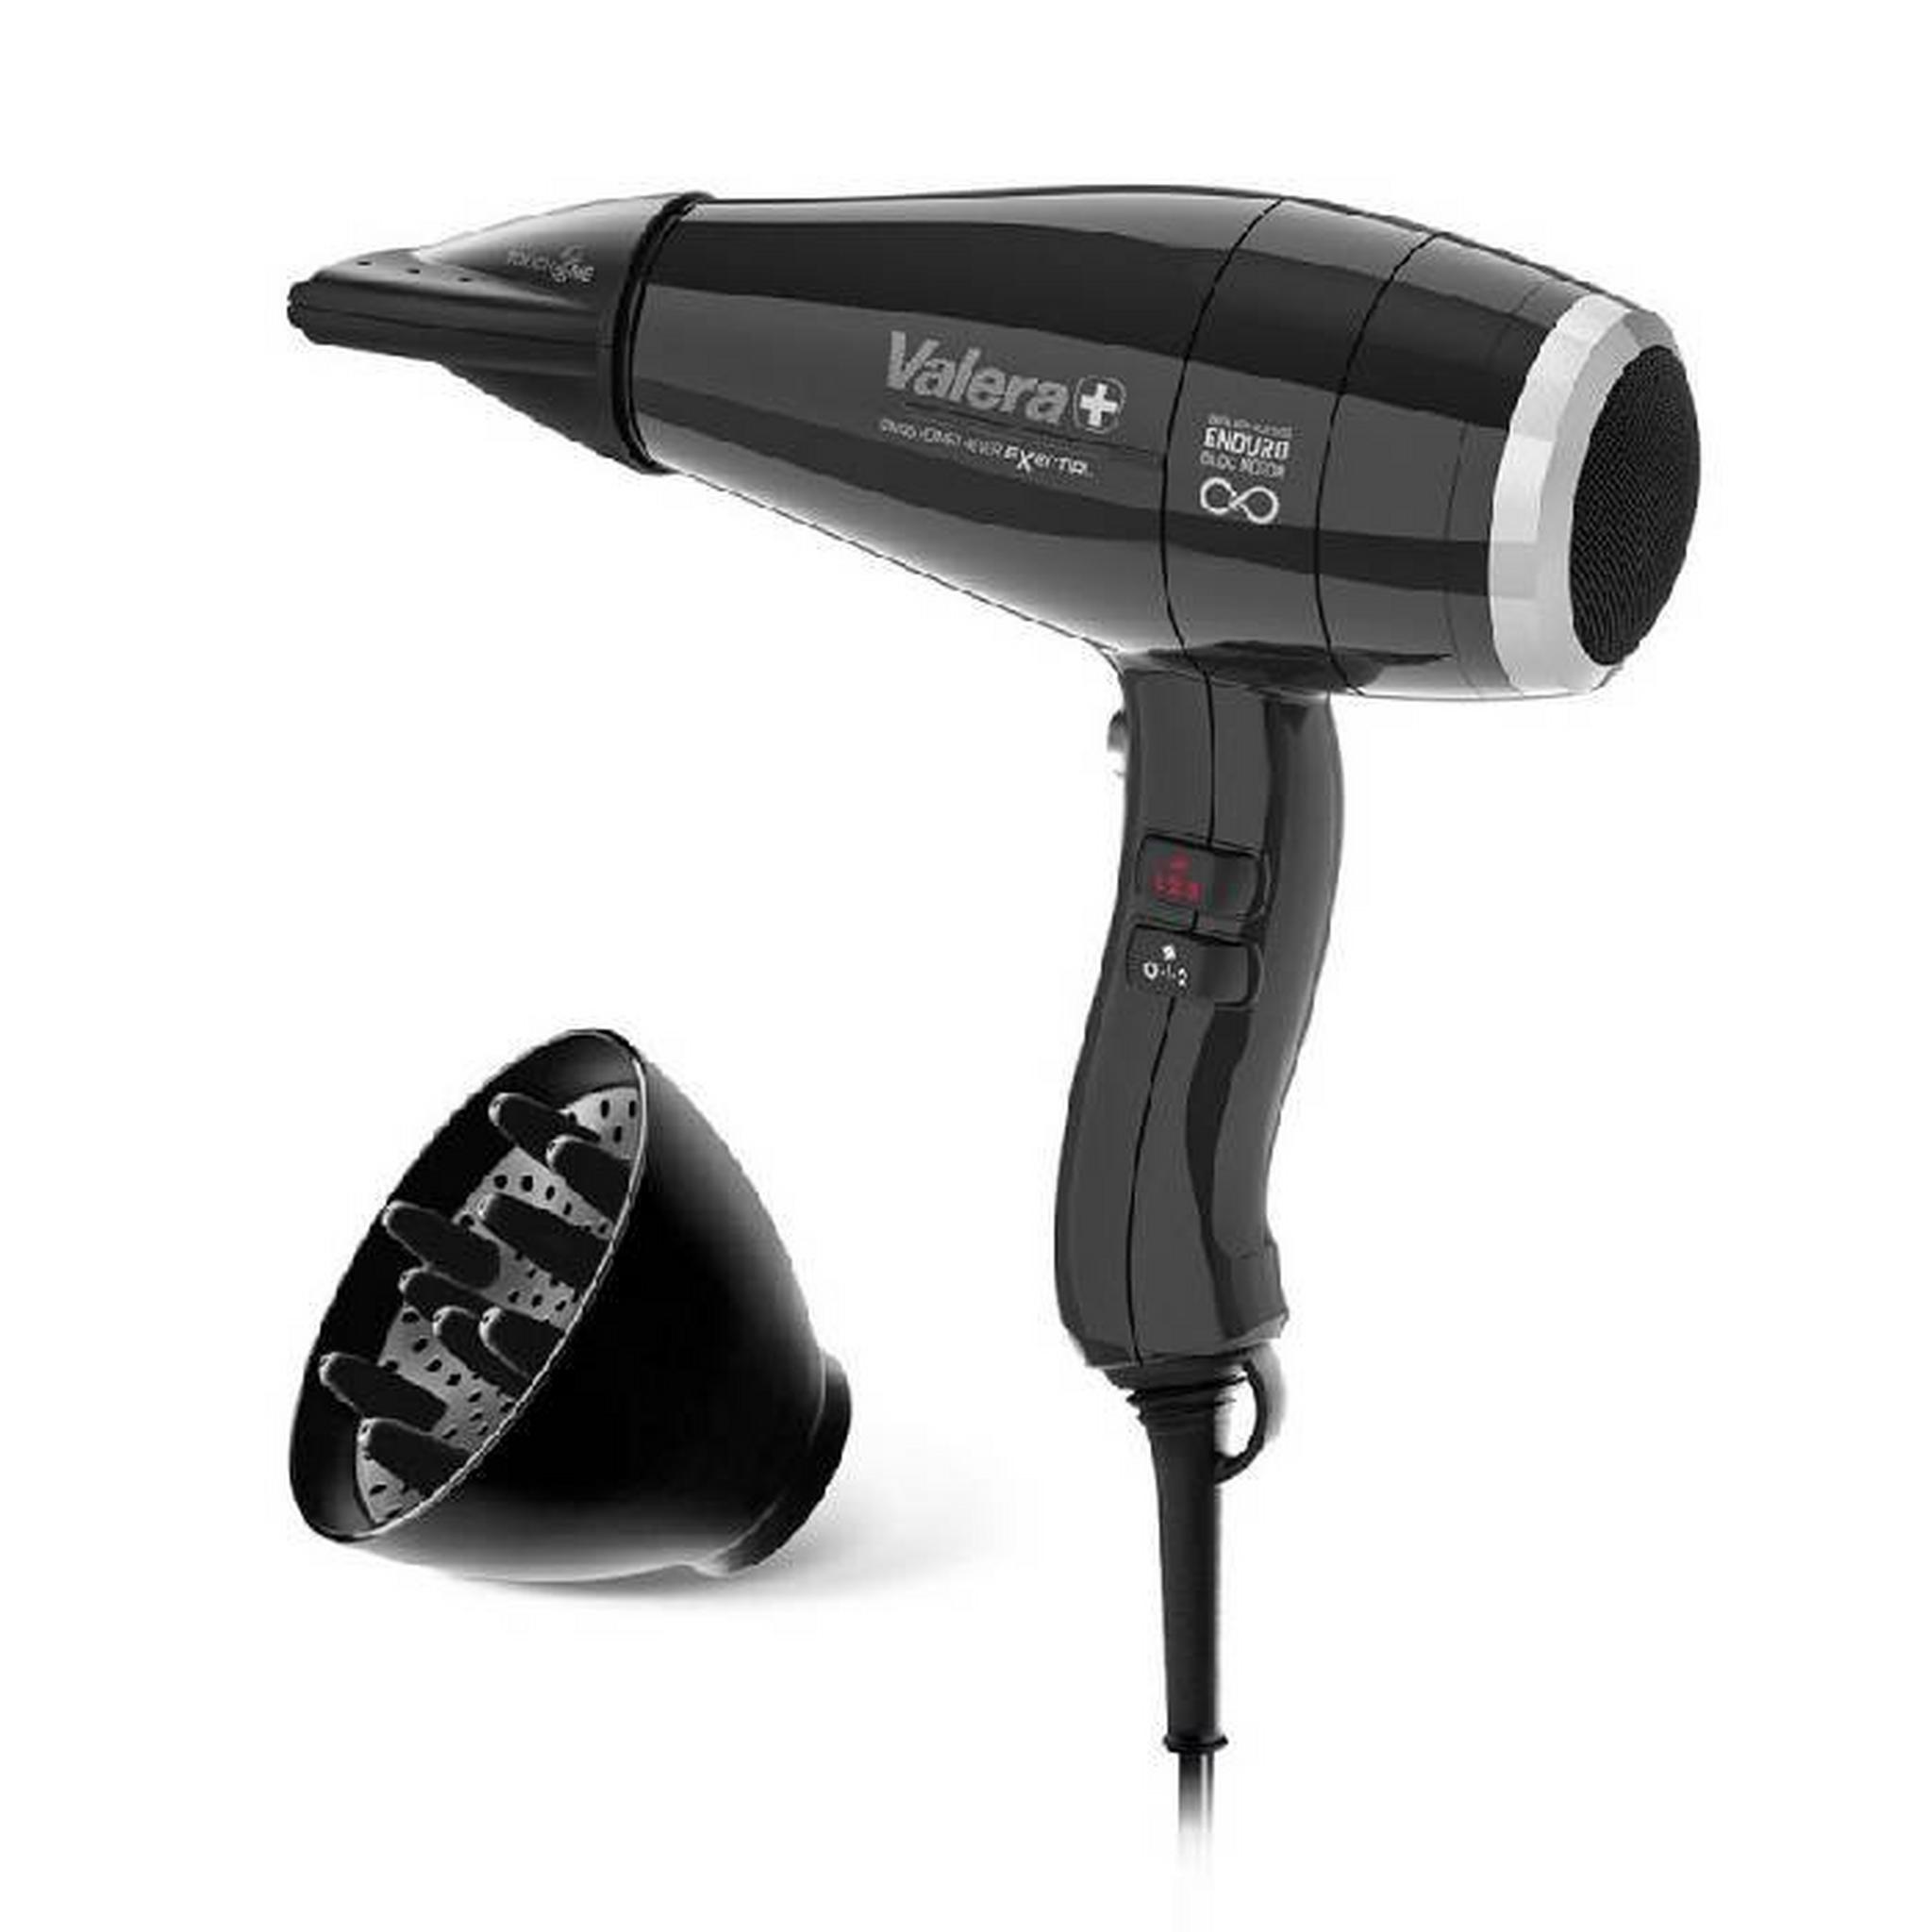 Valera Swiss Power4ever exential RC D Hair Dryer, 2400 W, 6 Heat Settings, SP4E RC D - Black